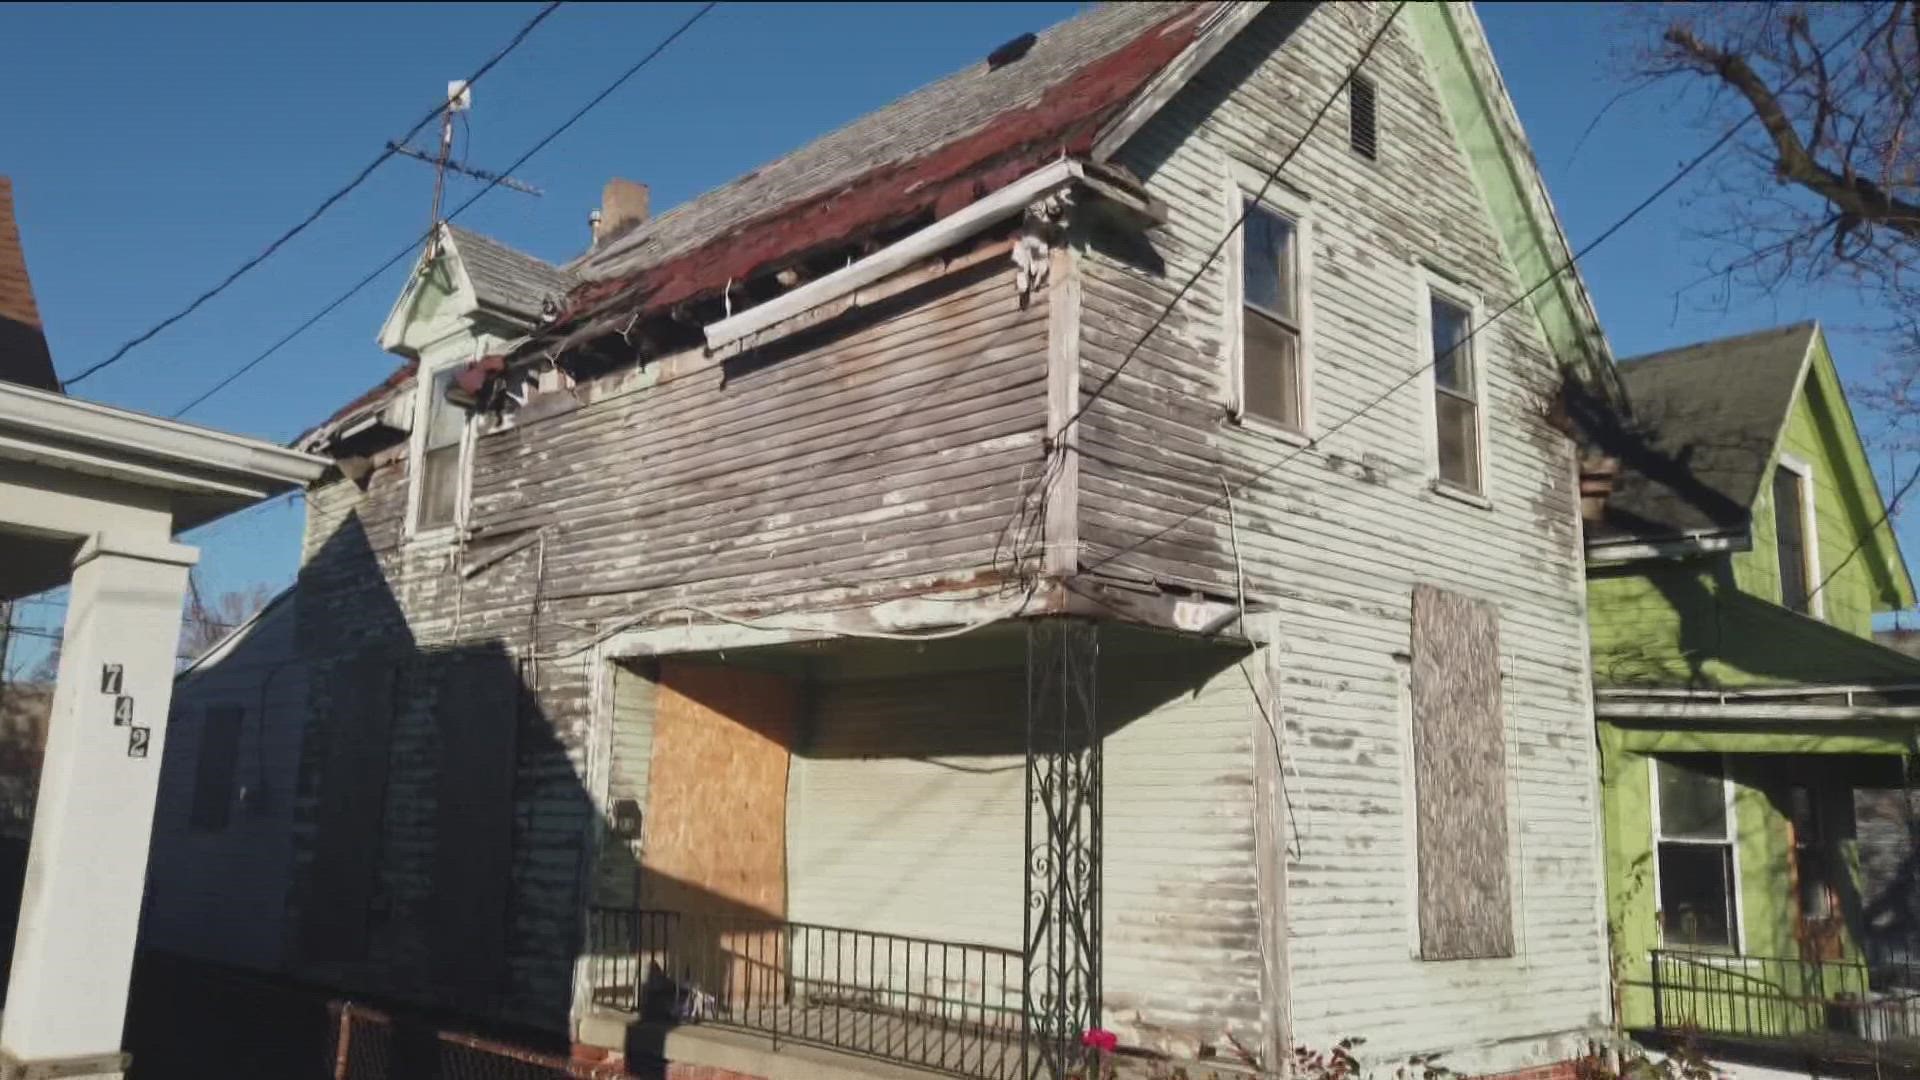 11 Investigates found $52 million in delinquent property taxes and 1,500 homes that need to be demolished are an issue for Toledo.